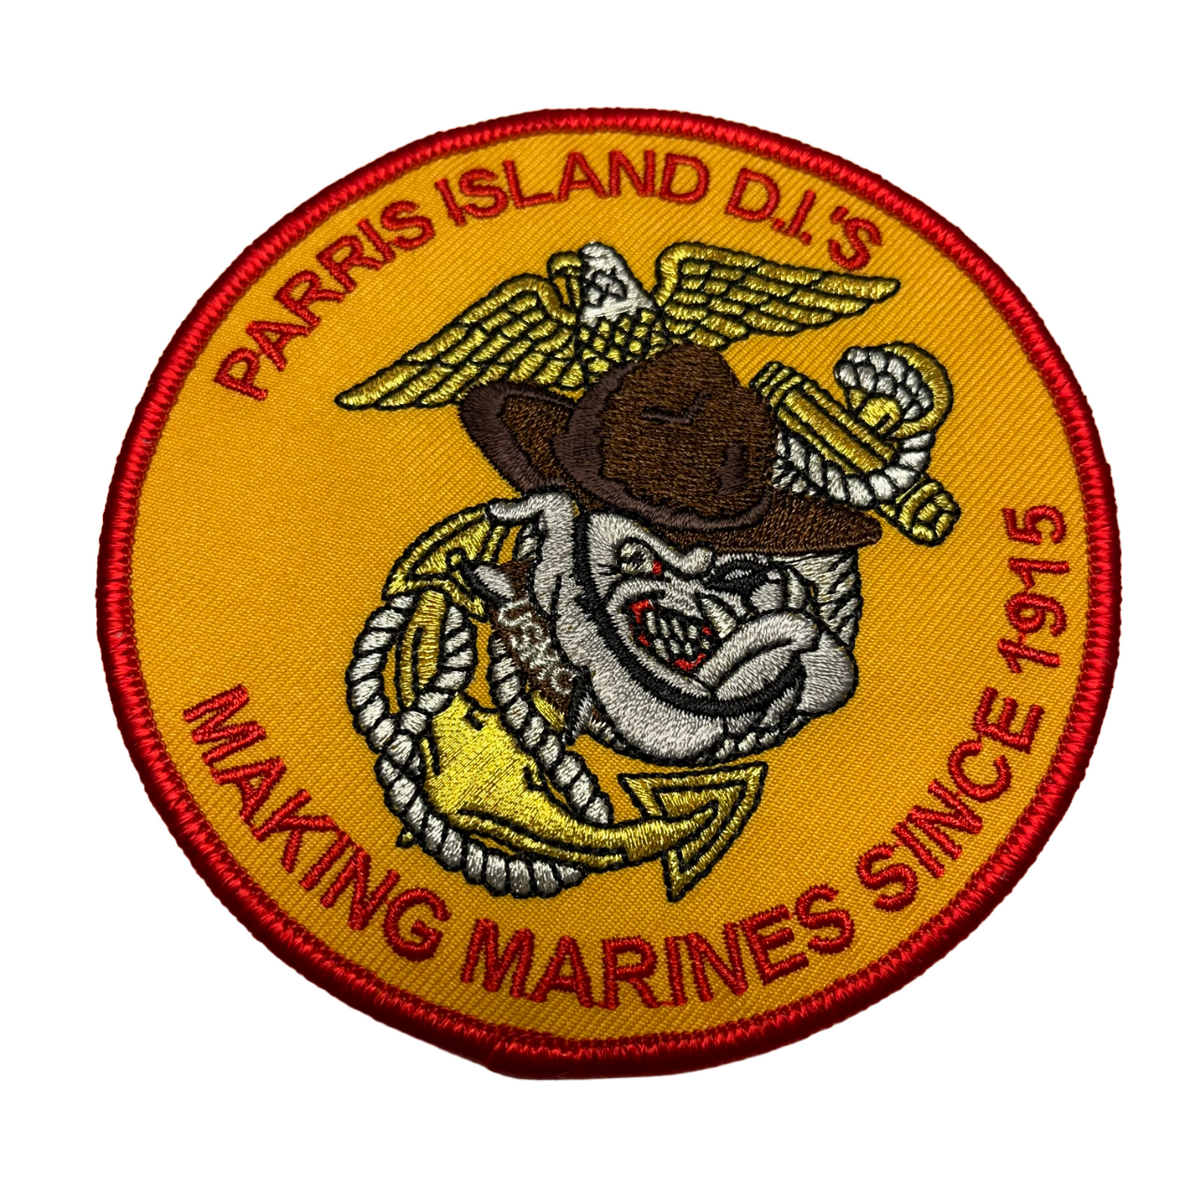 Parris Island D.I.'s - Sew-On Patch